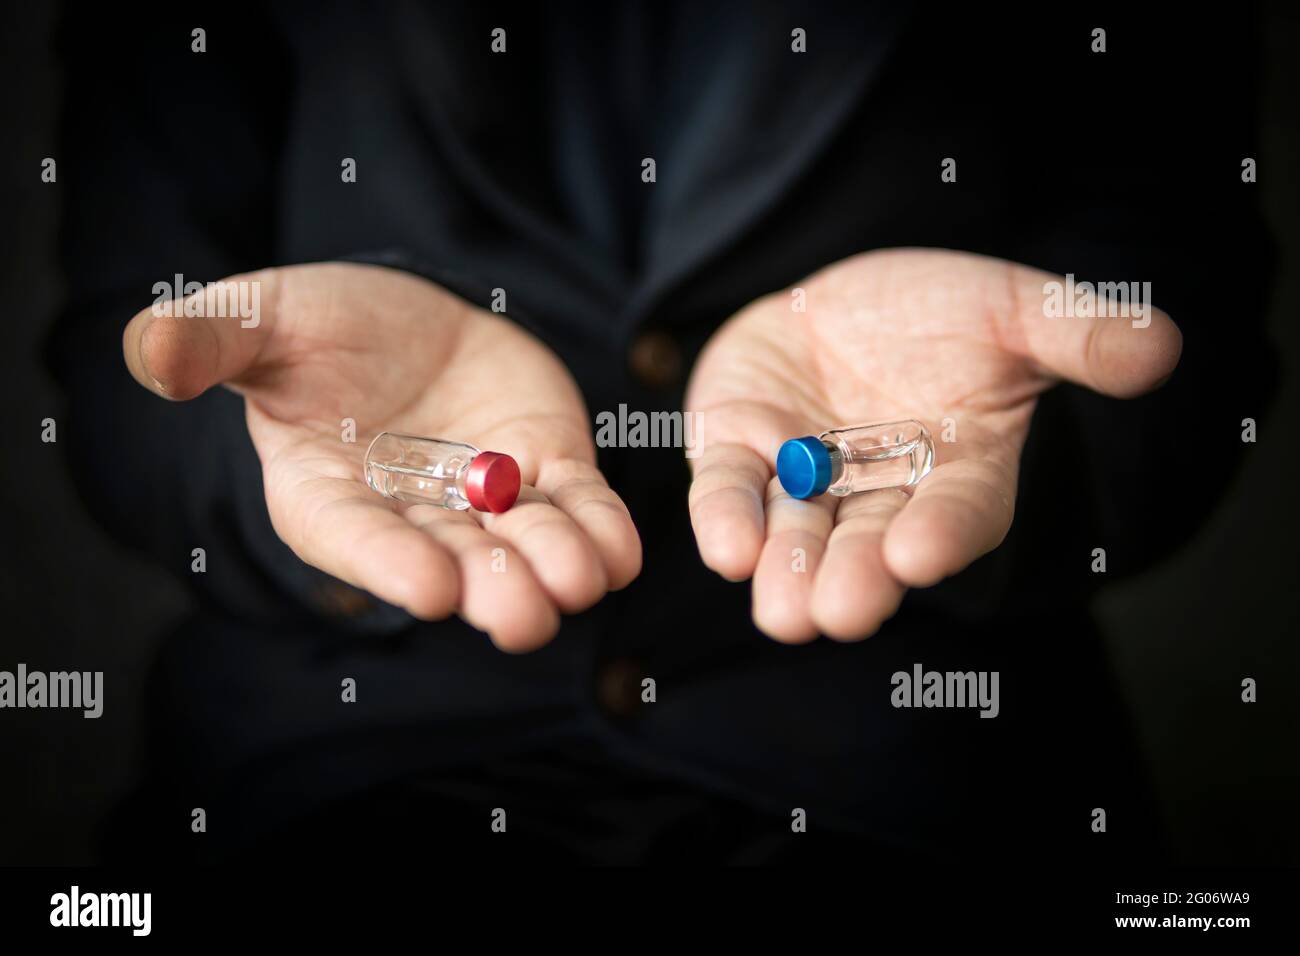 red ampoule and blue ampoule. The right choice the concept of the movie matrix. choosing the best vaccine Stock Photo